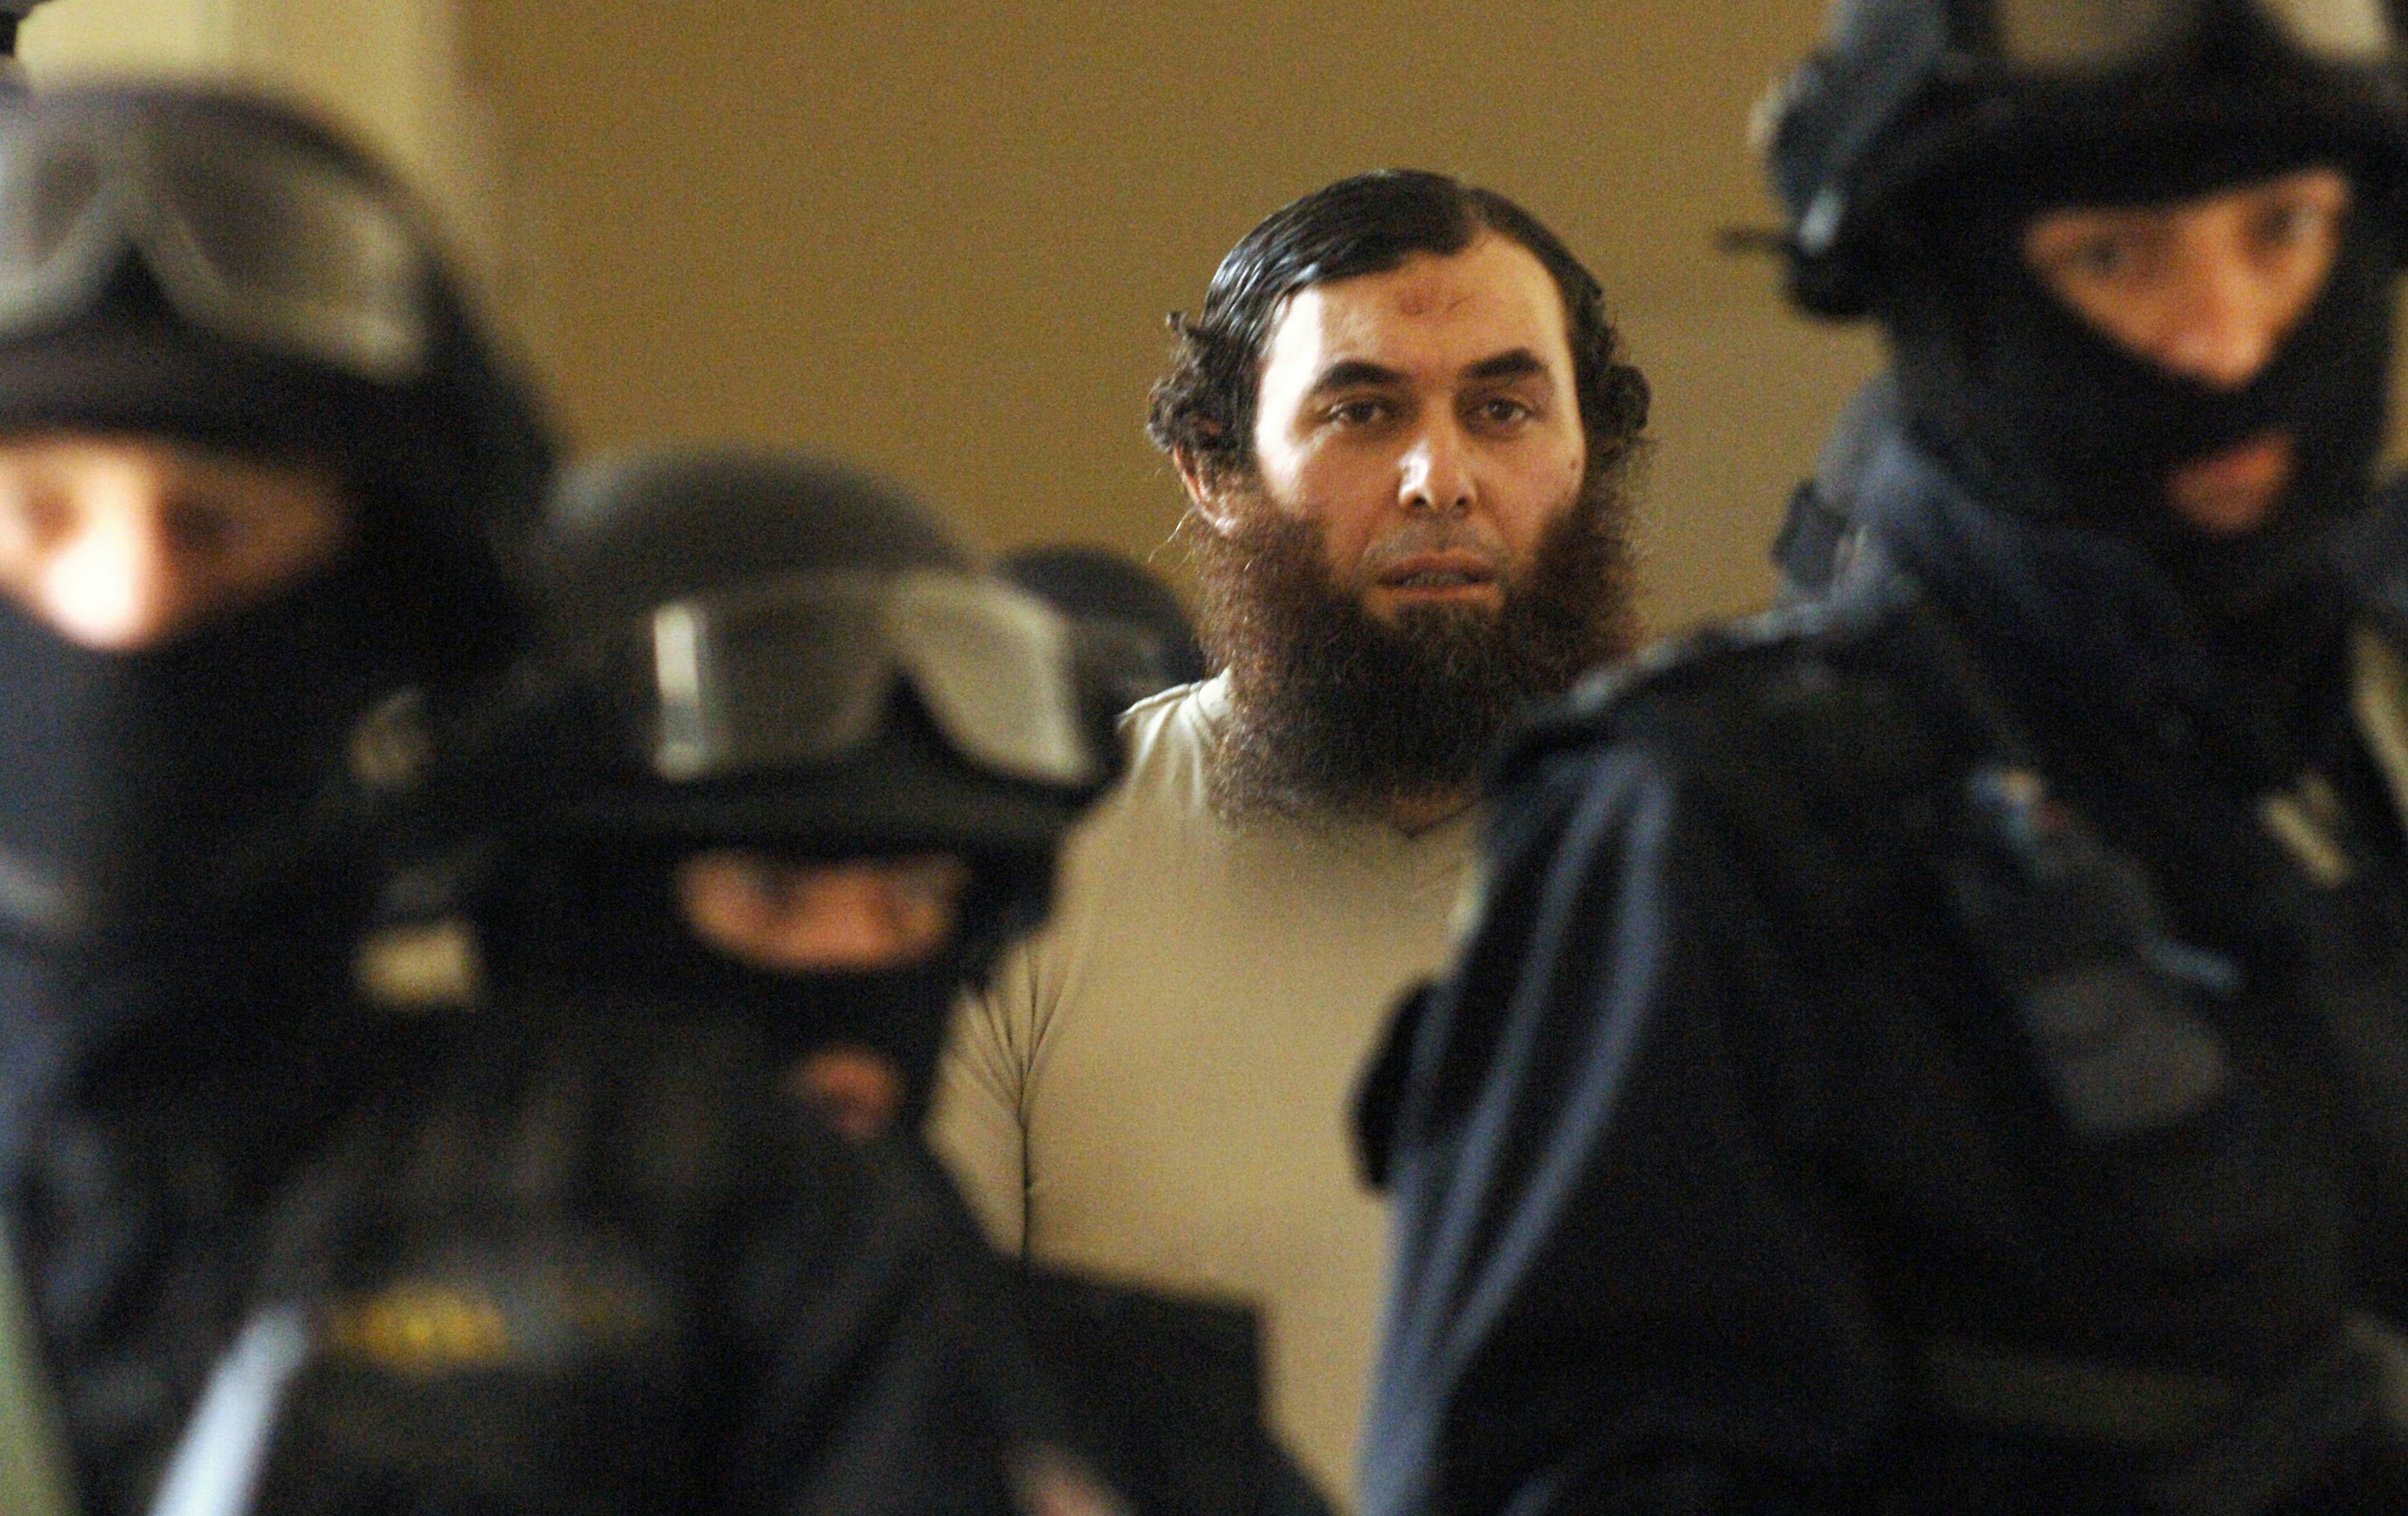 Oussama Kassir, center, Lebanese-born Swedish citizen wanted in the United States on suspicion of plotting to set up a terrorist camp there, is escorted by heavily armed policemen to the courtroom in Prague on Wednesday, April 25, 2007. The Czech court ruled today that Oussama Kassir can be extradited to the USA however he immediately appealed the decision of the Municipal Court in Prague. Kassir is charged in the USA with conspiracy aimed at providing material support to terrorists for which he faces up to a life sentence if found guilty. Kassir was arrested by the Czech police upon an international arrest warrant at Prague's Ruzyne airport during a stop-over of his plane flying from Stockholm to Beirut in December 2005. (AP Photo/CTK) ** SLOVAKIA OUT **